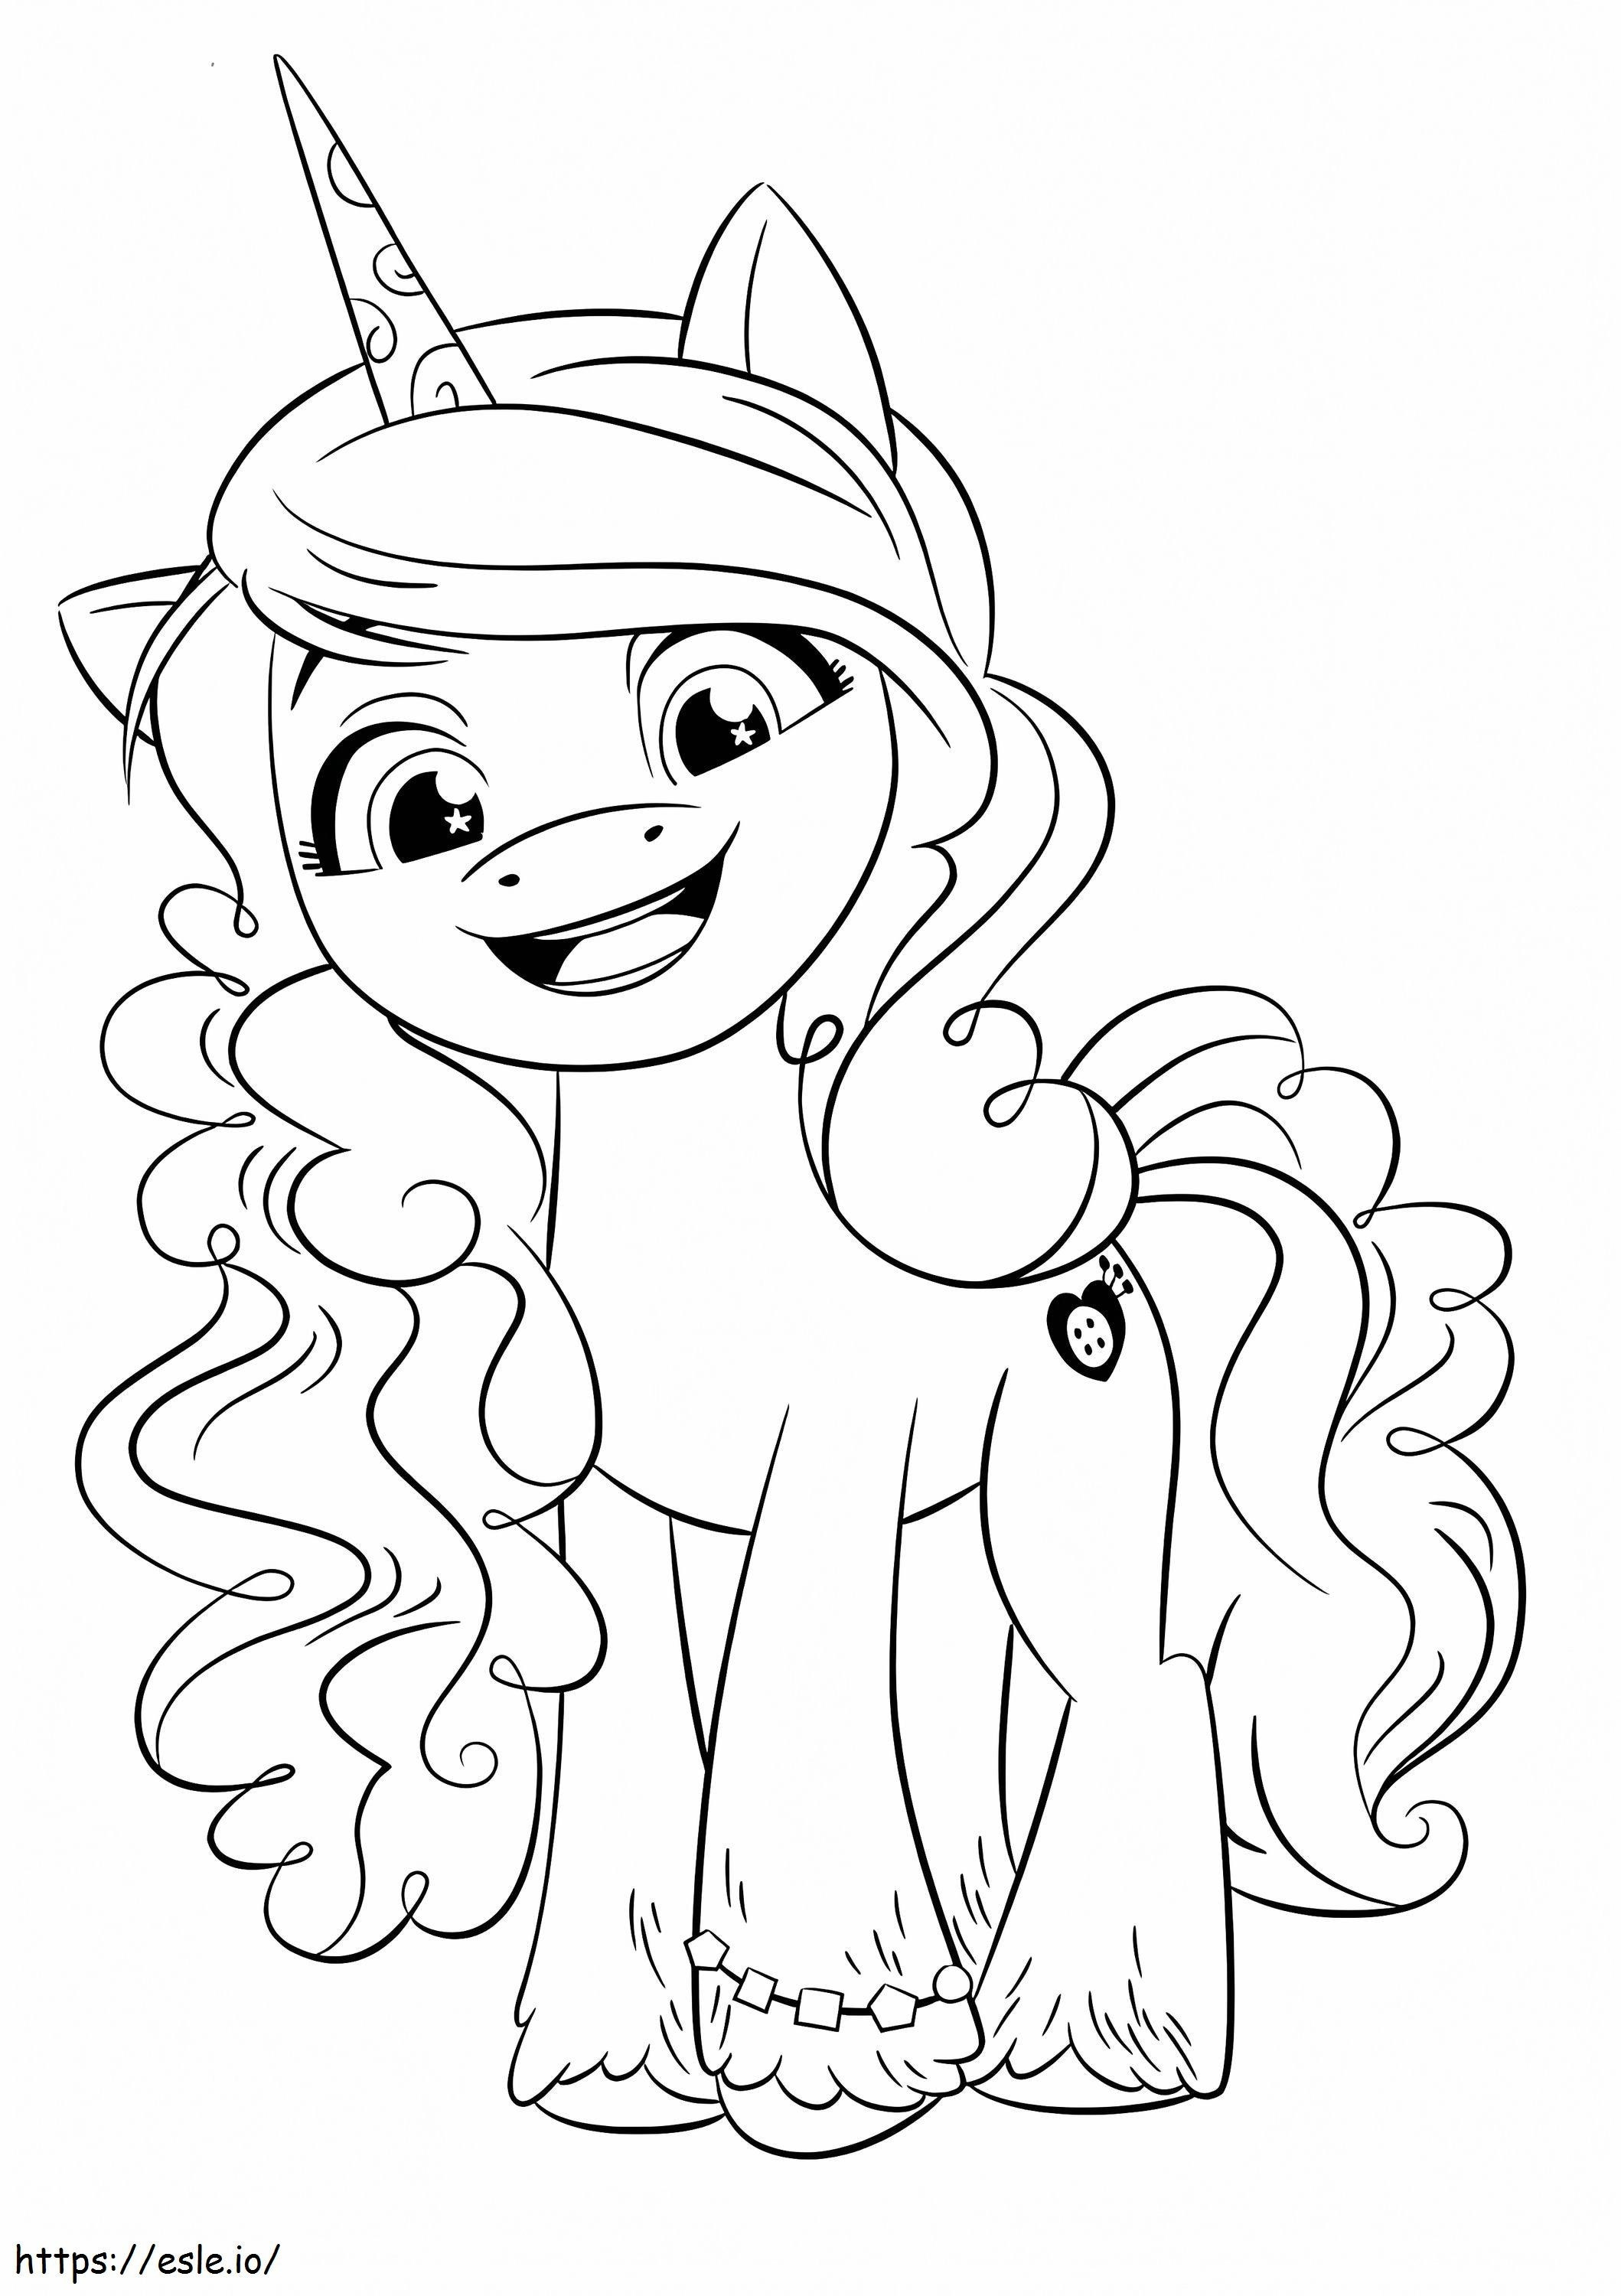 Adorable Izzy Moonbow coloring page